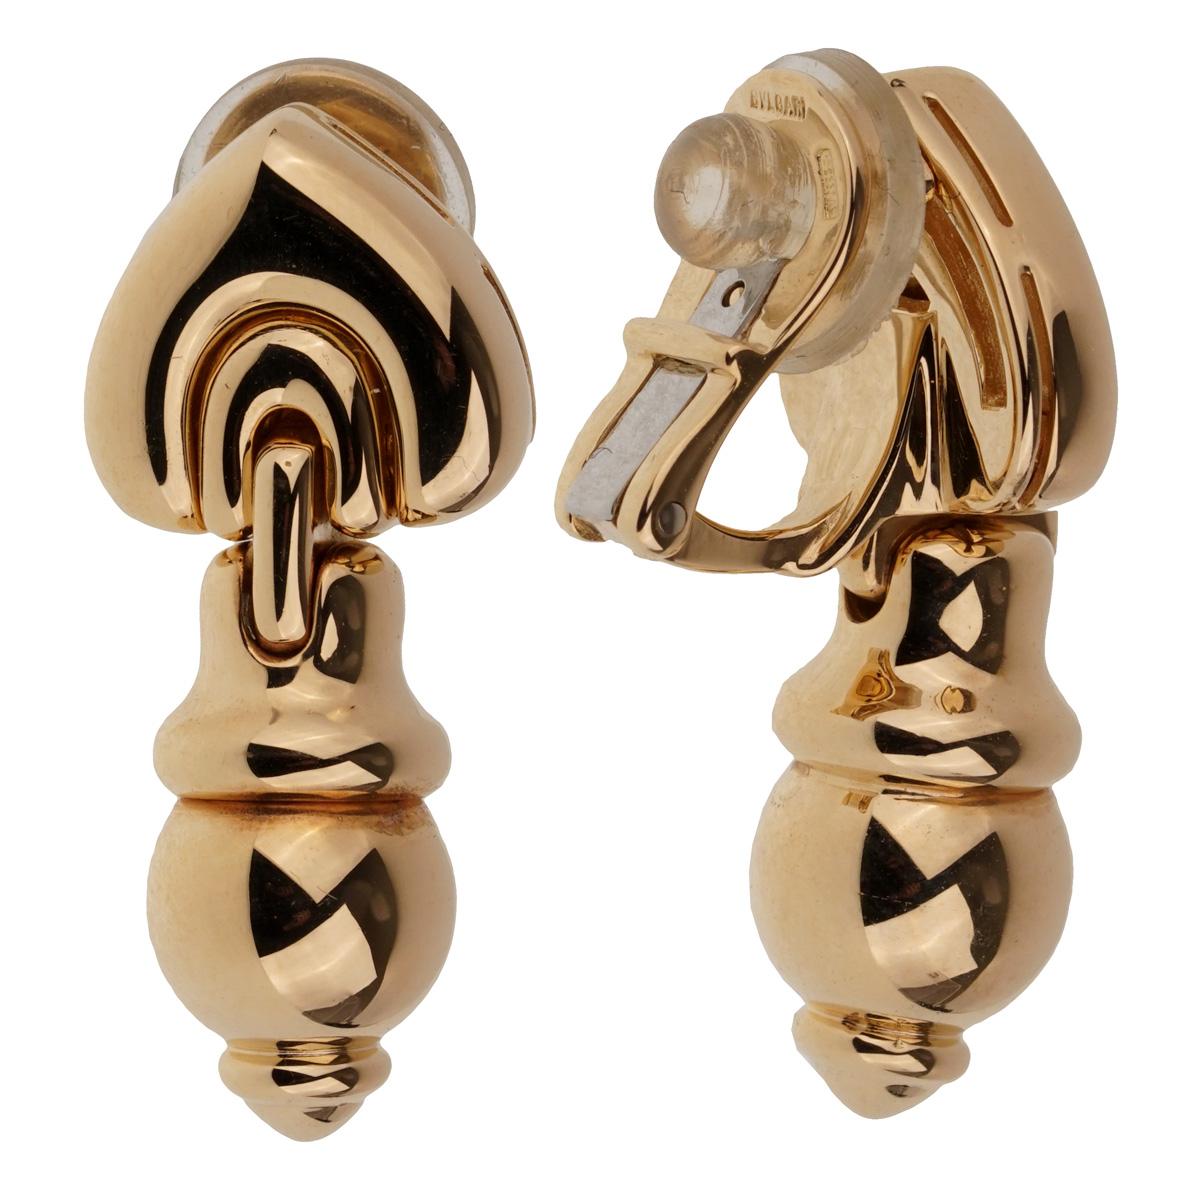 A fabulous pair of vintage Bulgari drop clip-on earrings crafted in 18k yellow gold. The earrings measure 1